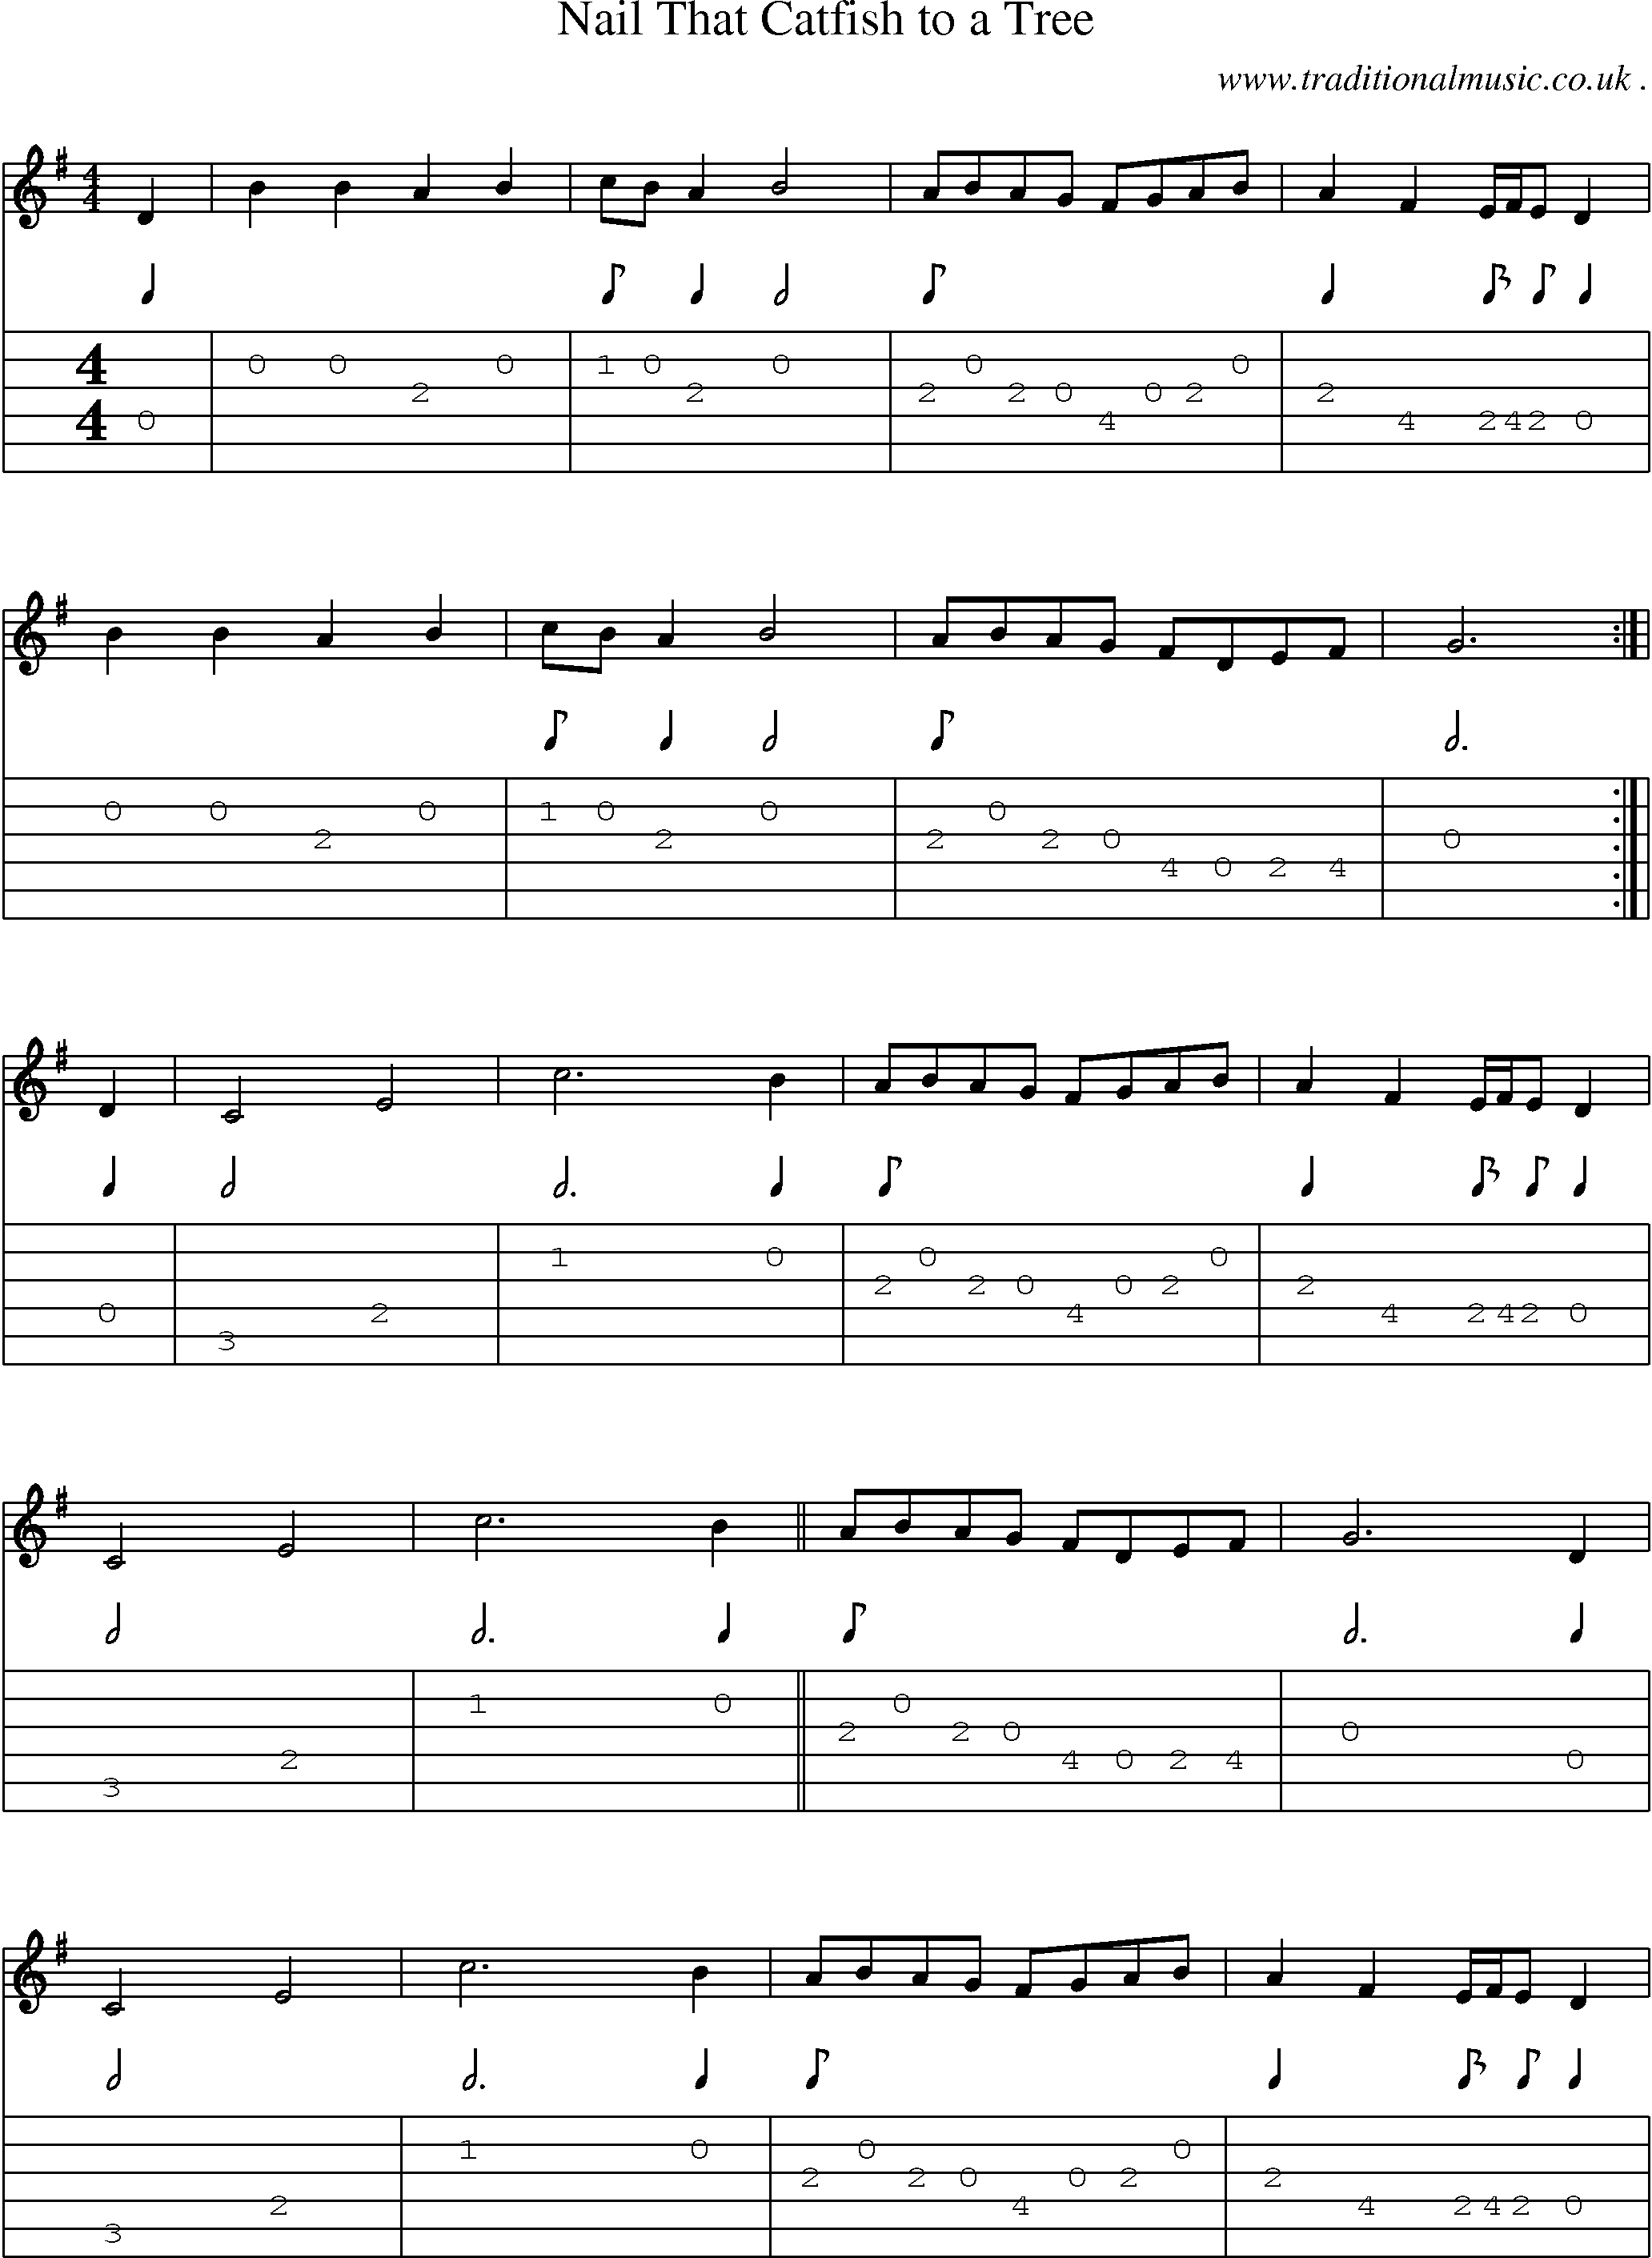 Music Score and Guitar Tabs for Nail That Catfish To A Tree